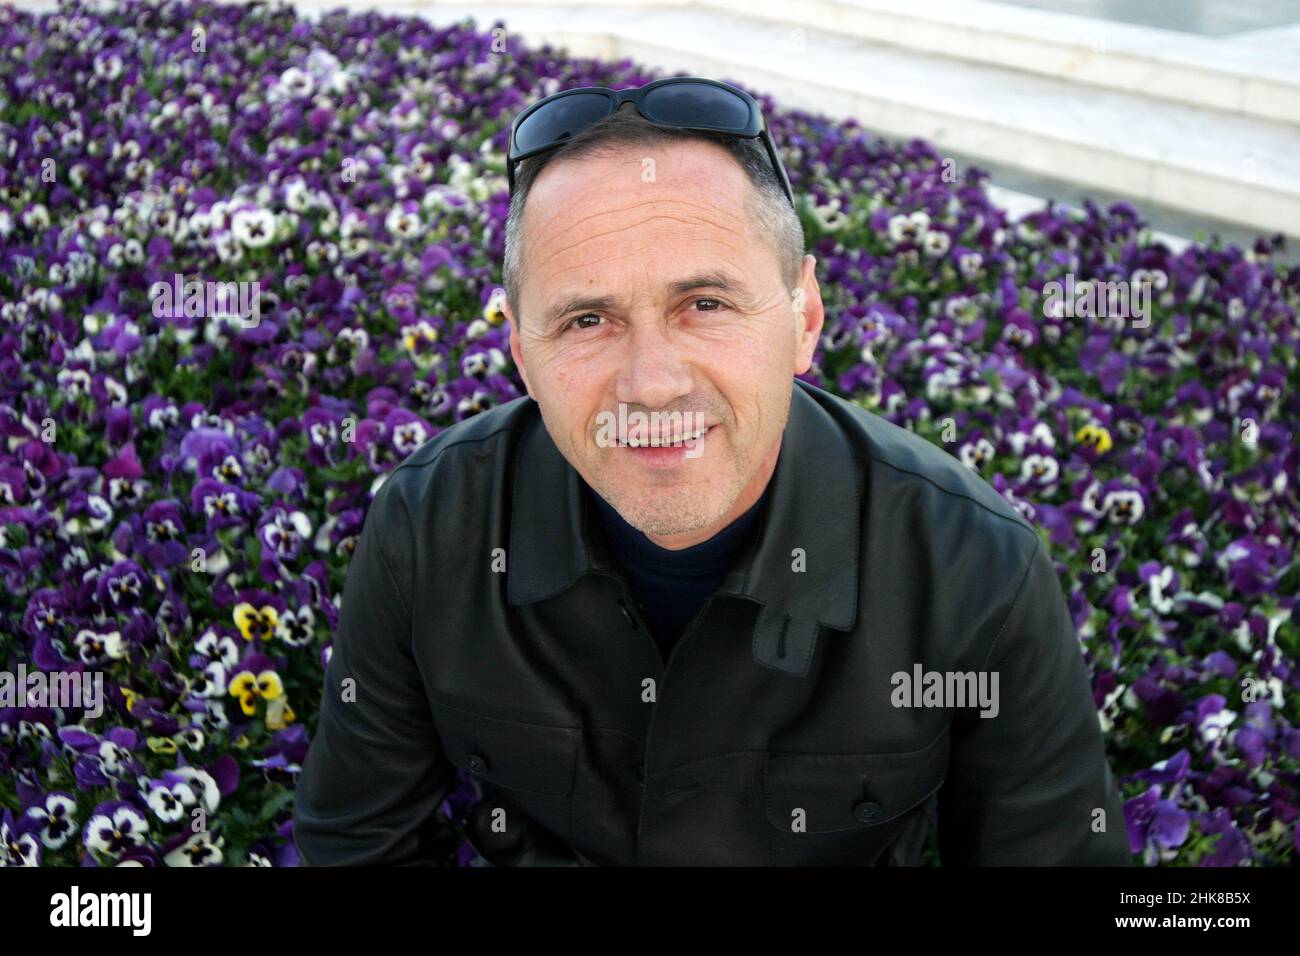 ISTANBUL, TURKEY - APRIL 25: Famous Serbian former football player and manager Cevad Prekazi portrait on April 25, 2006 in Istanbul, Turkey. He spent the majority of his professional career with Galatasaray. Stock Photo